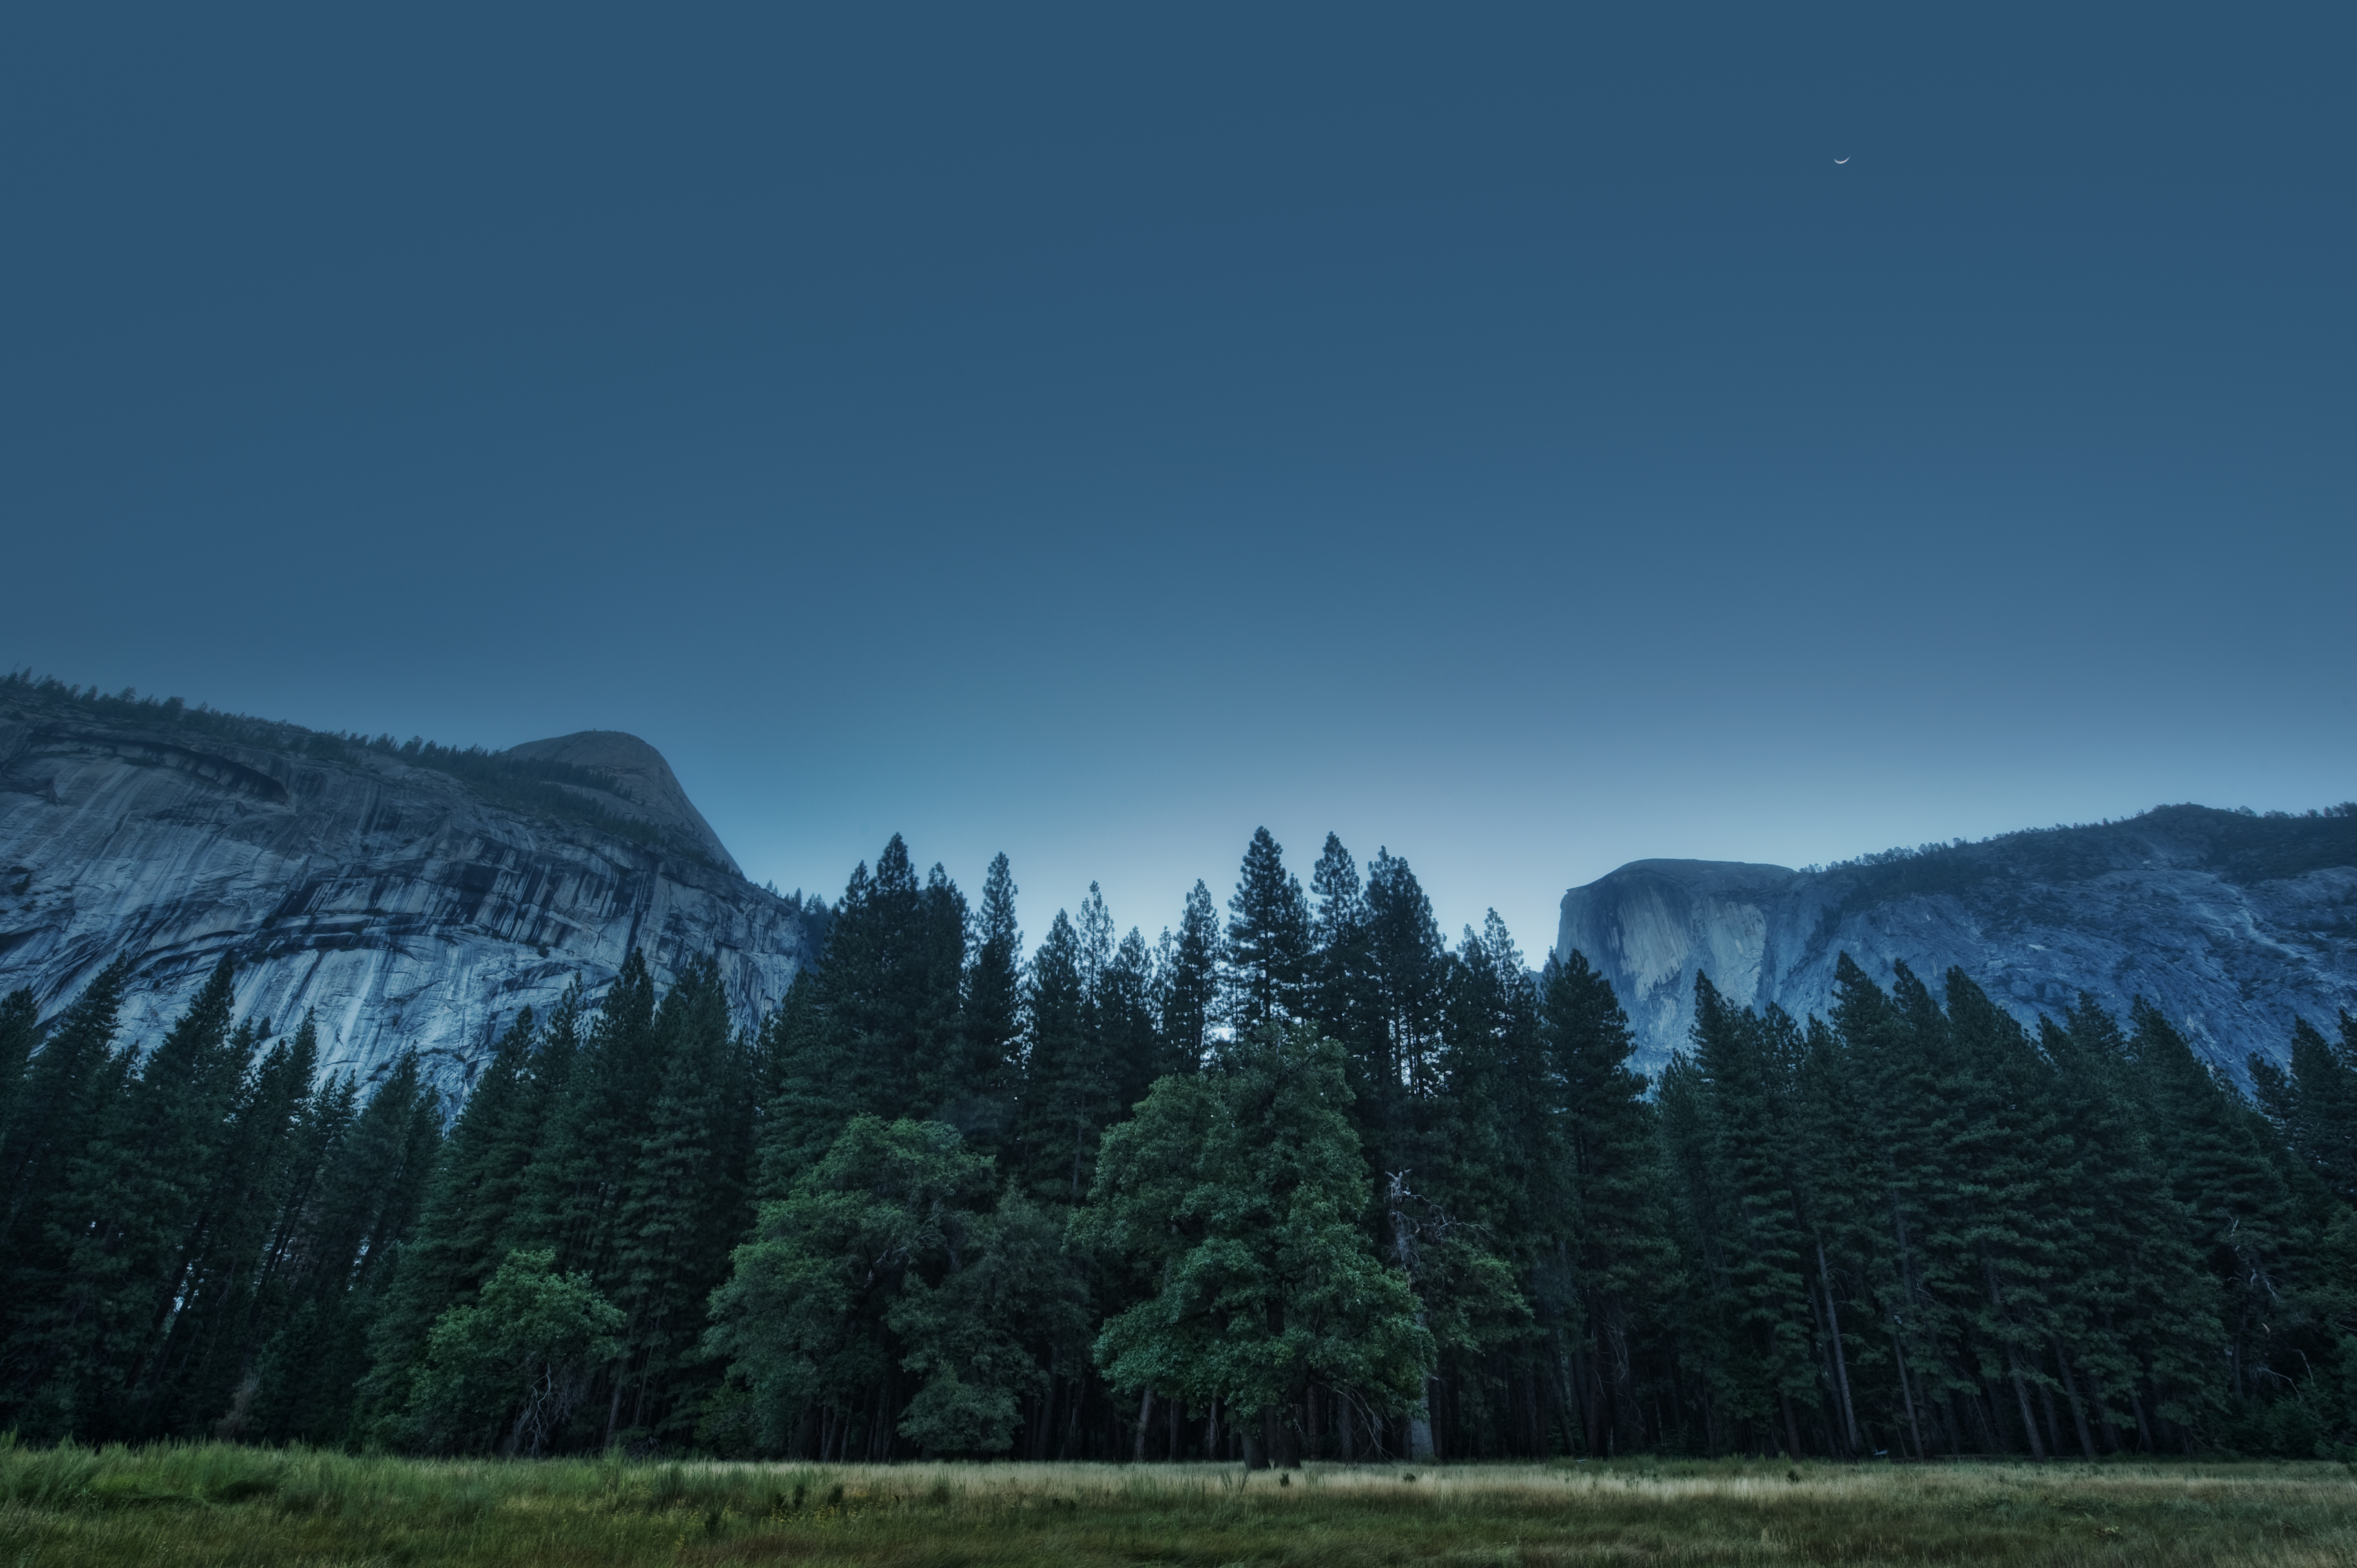 national park, nature, trees, mountains, usa, forest, united states, california state, california, yosemite valley